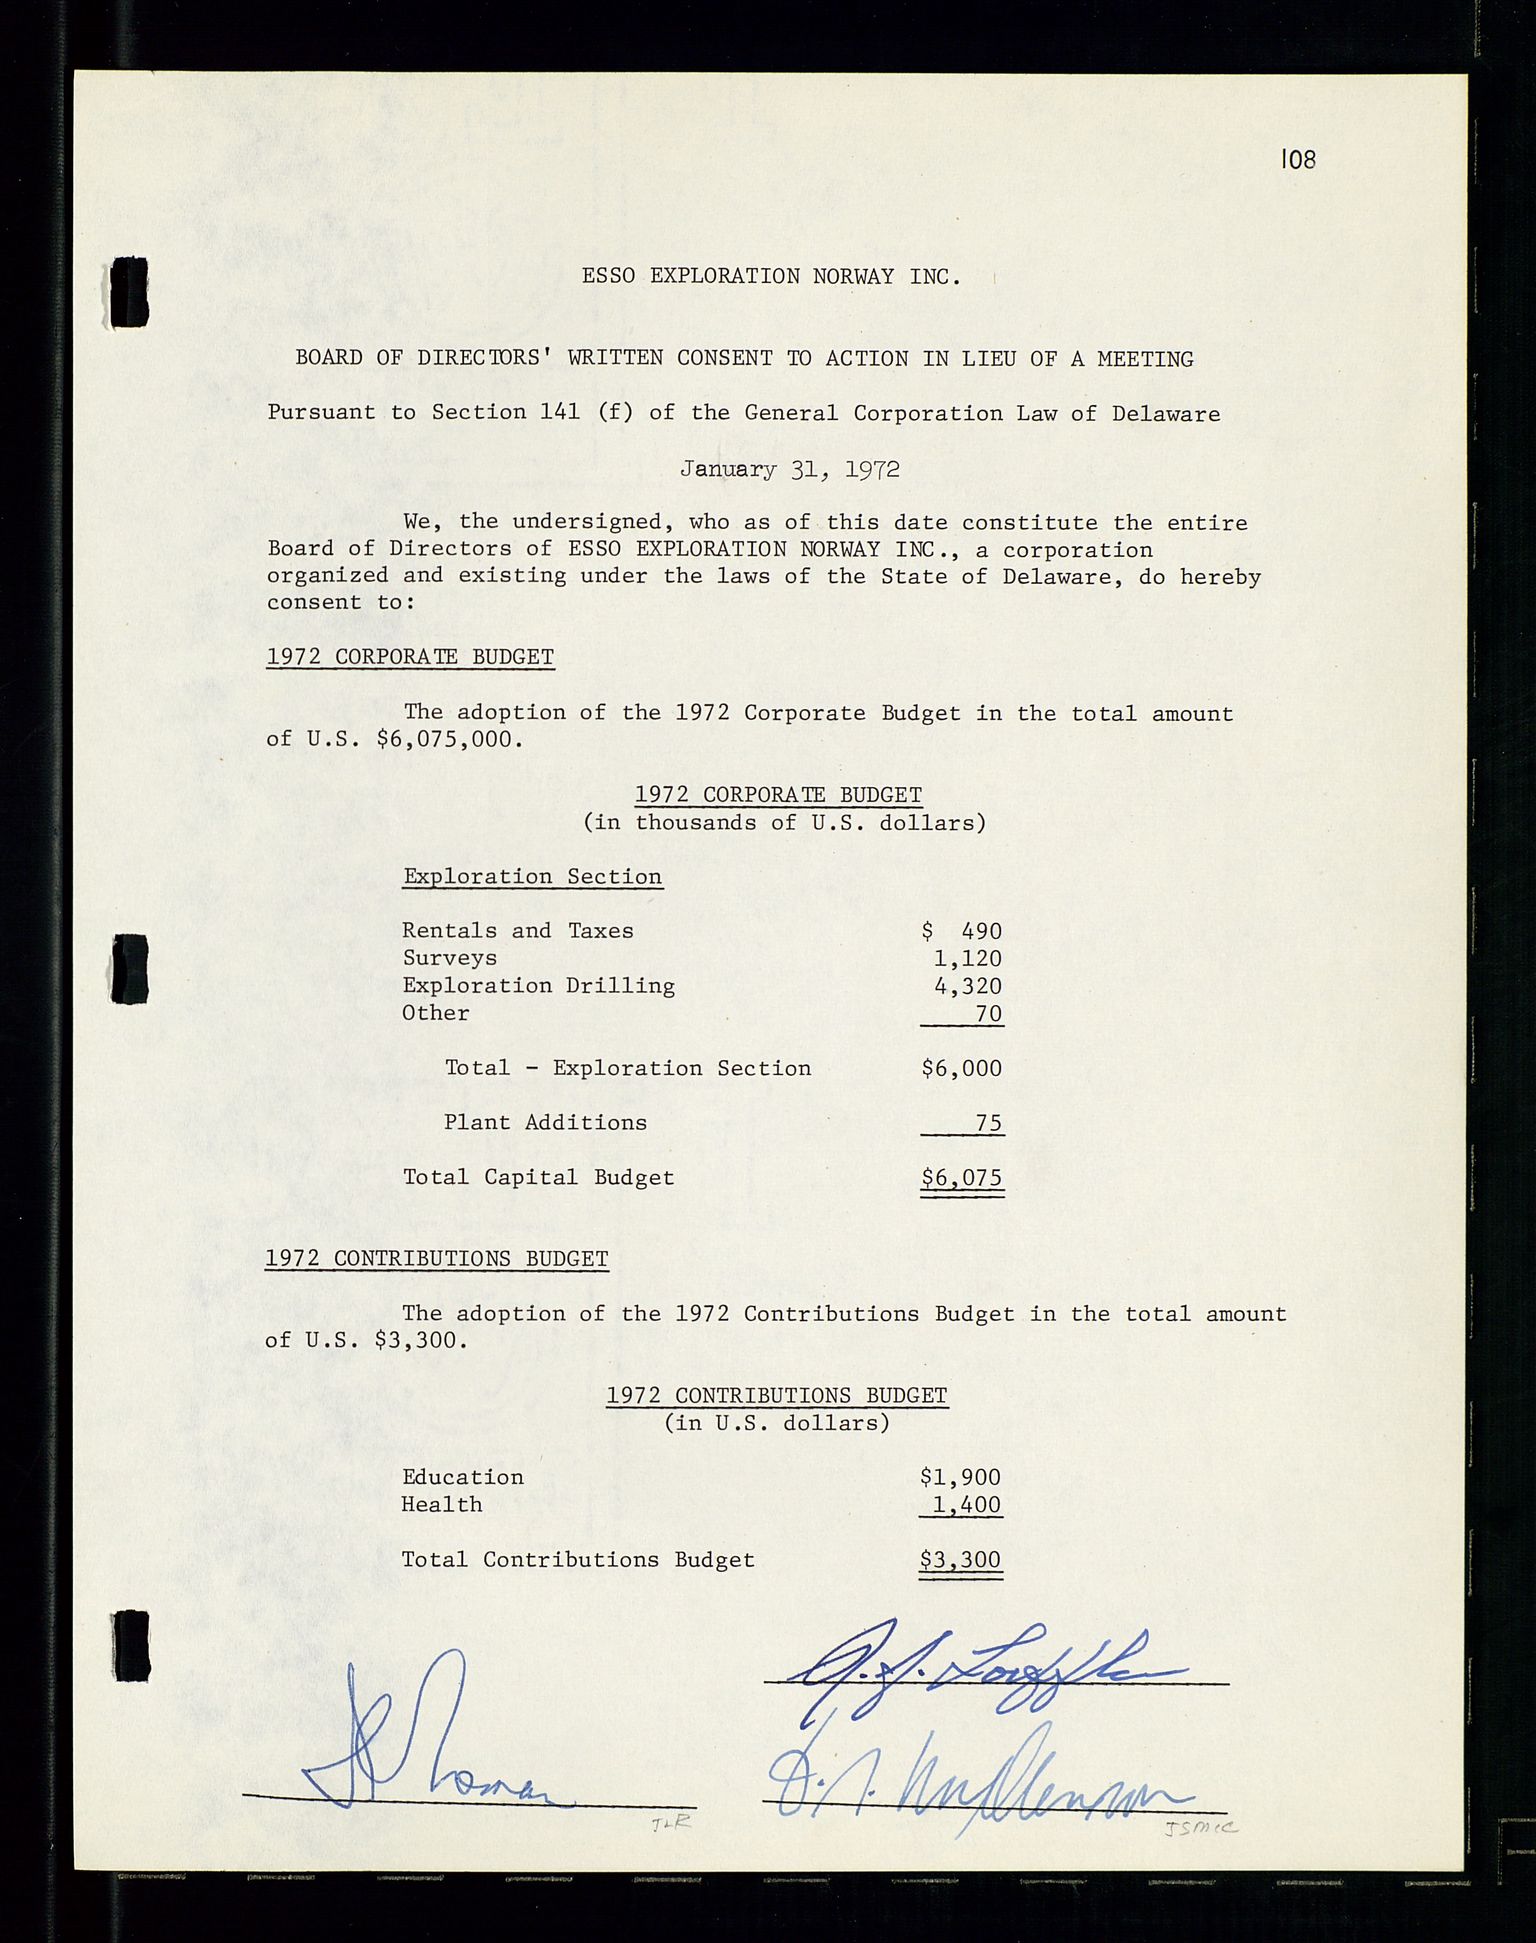 Pa 1512 - Esso Exploration and Production Norway Inc., SAST/A-101917/A/Aa/L0001/0001: Styredokumenter / Corporate records, By-Laws, Board meeting minutes, Incorporations, 1965-1975, s. 108